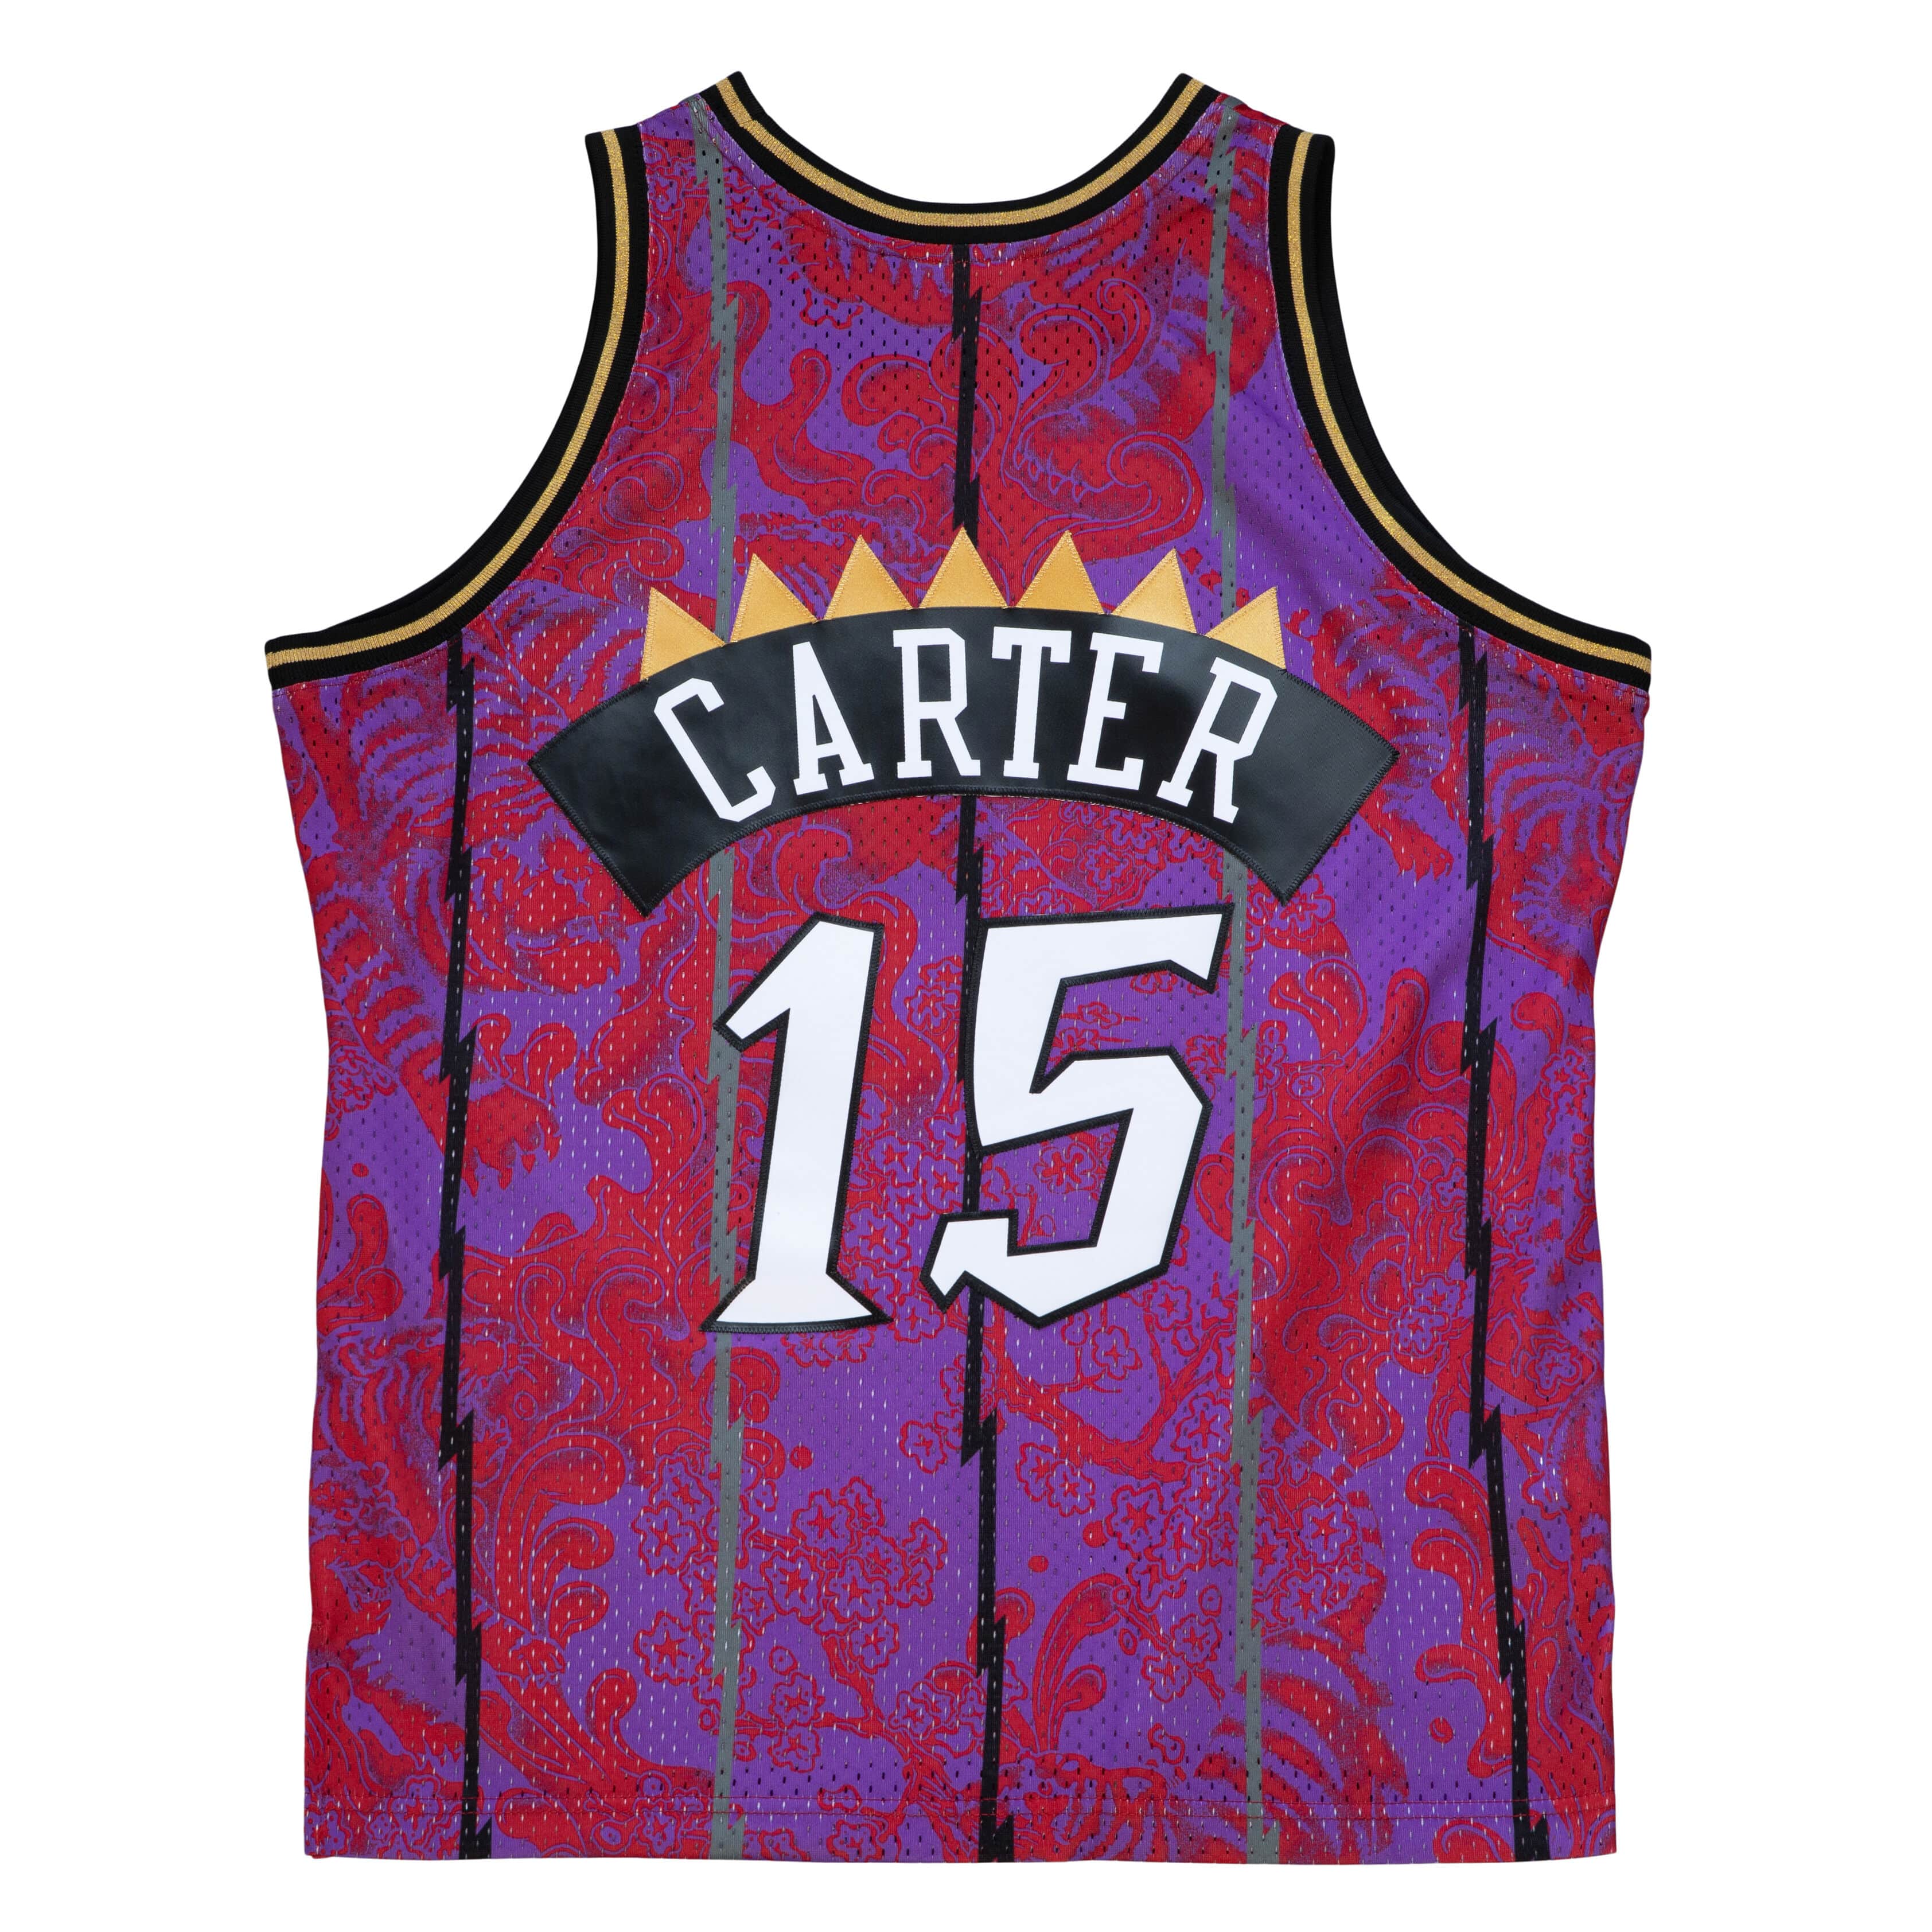 Canada We The North Toronto Raptors Red Ugly Sweater